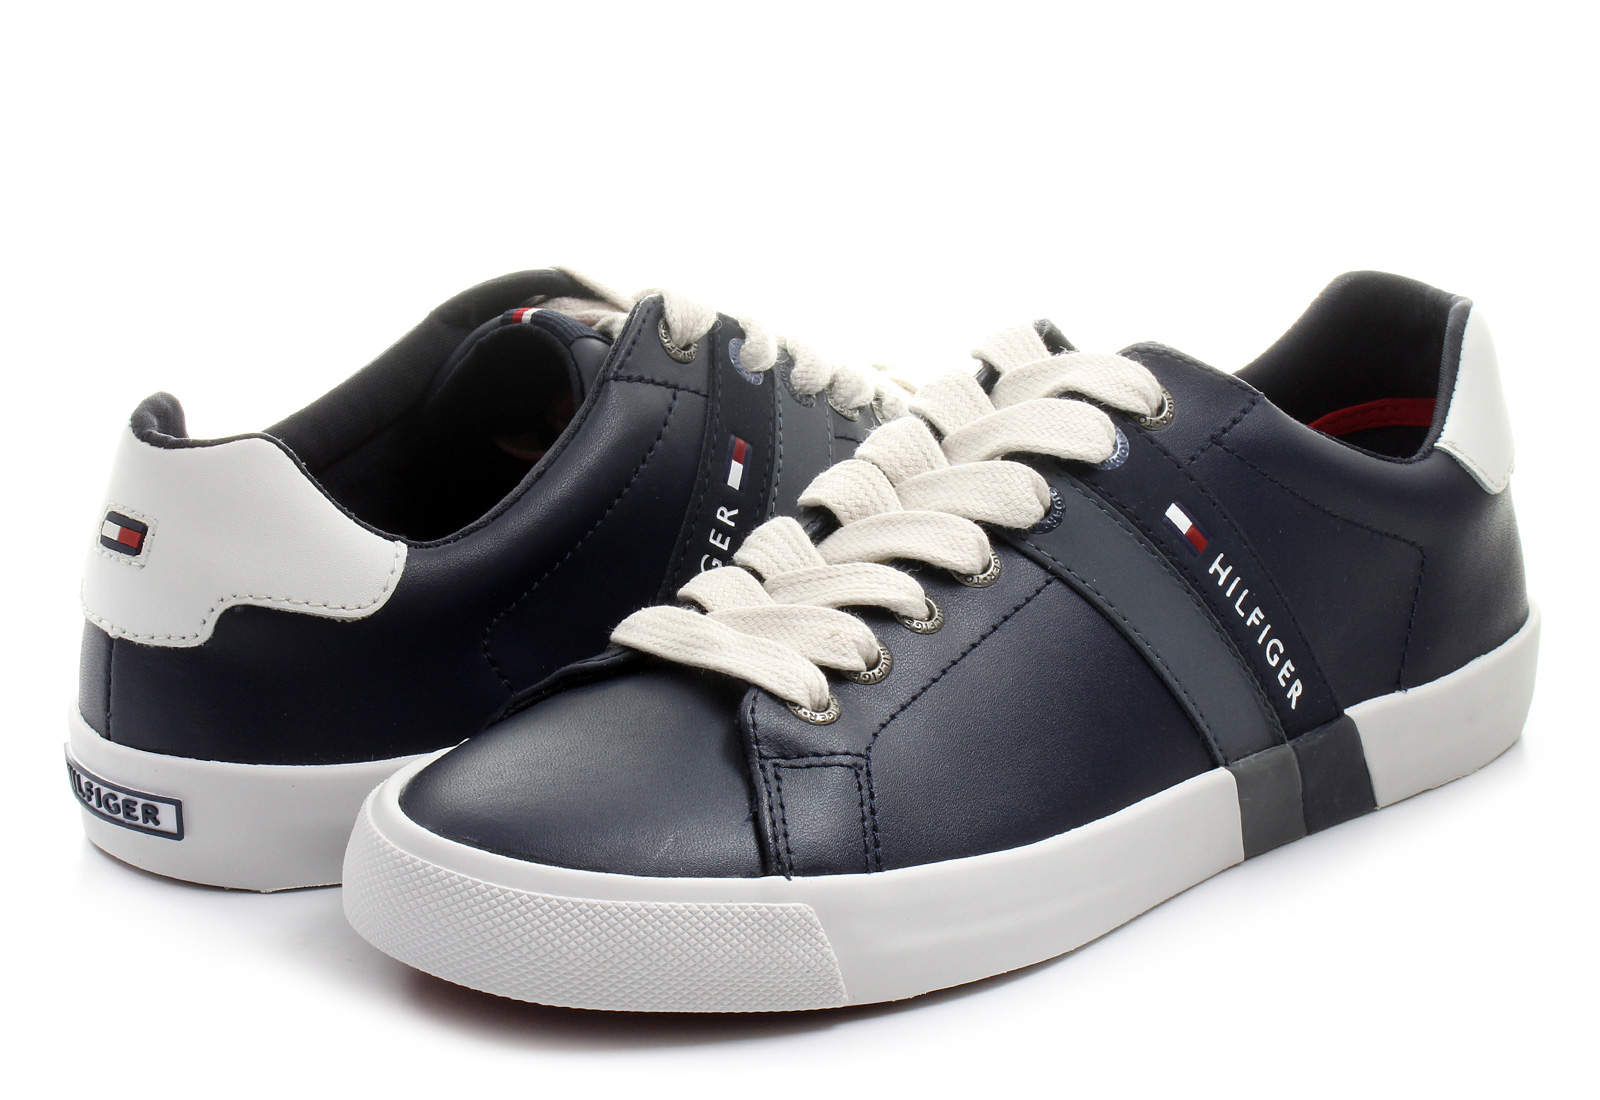 Tommy Hilfiger Shoes - Volley 5a - 15F-0557-260 - Online shop for sneakers, shoes and boots